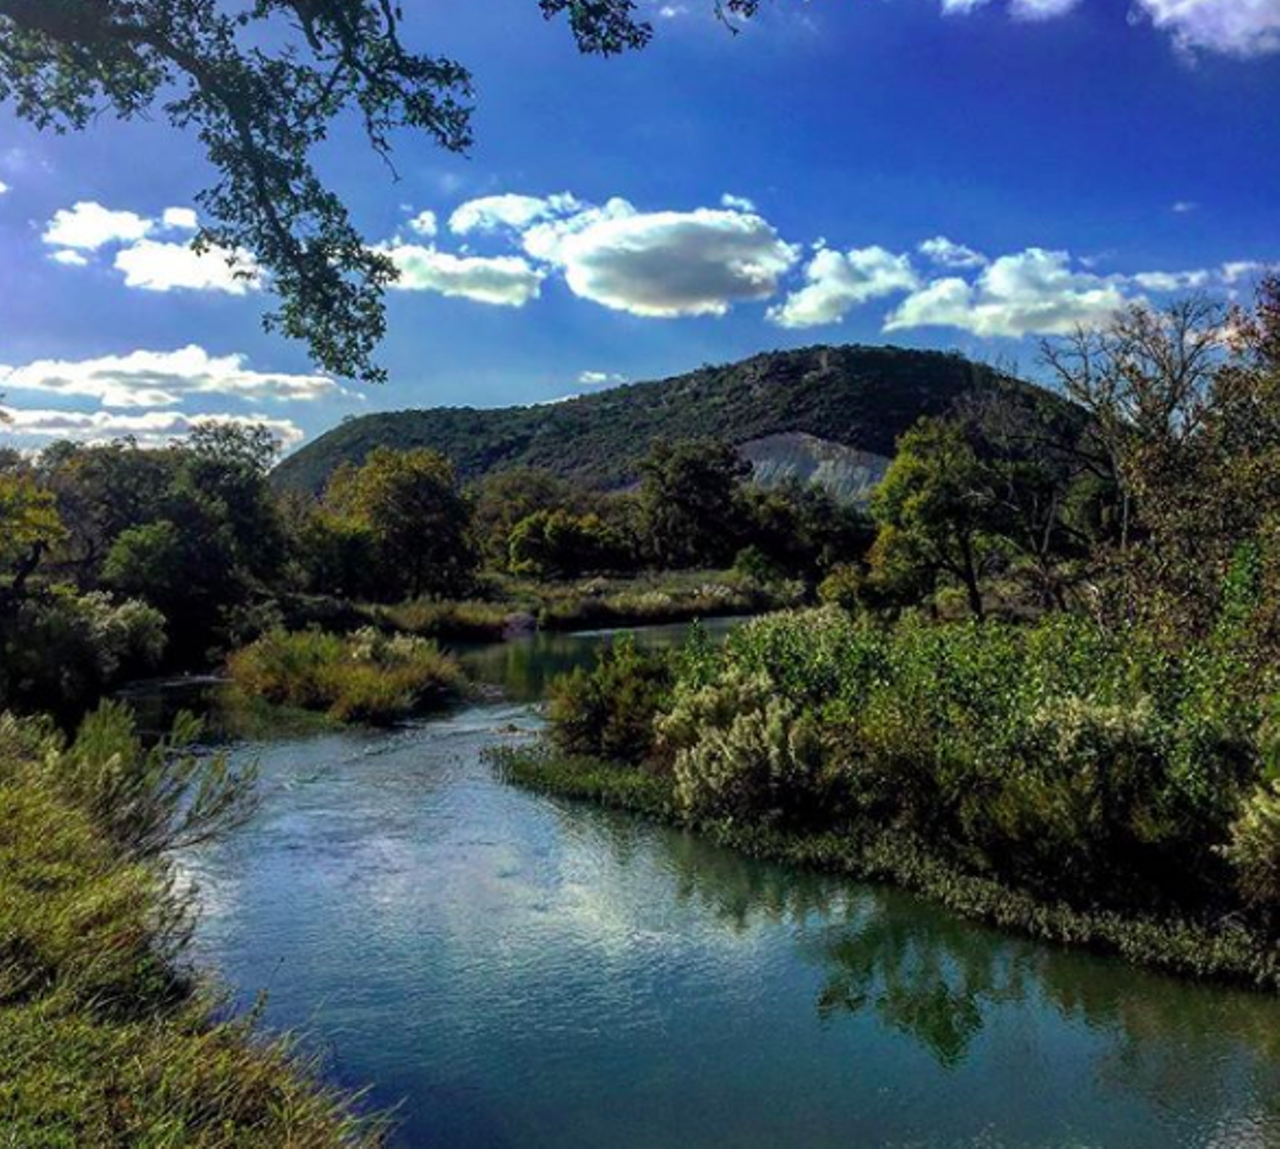 South Llano River State Park
1927 Park Rd 73, Junction, (325) 446-3994, tpwd.texas.gov
Nestled along the southern bank of the Llano River, this state park provides refuge for people. Still, humans can take part of the sereneness of the park, located in the Hill Country. Be sure to bring your sense of adventure so you can take your pick between swimming, floating the river, paddling and fishing, though you can stay dry by camping, hiking or biking. If you’re into astronomy, you may want to reserve time for some stargazing, as SLRSP is an International Dark Sky Park.
Photo via Instagram / psychadelic_bee